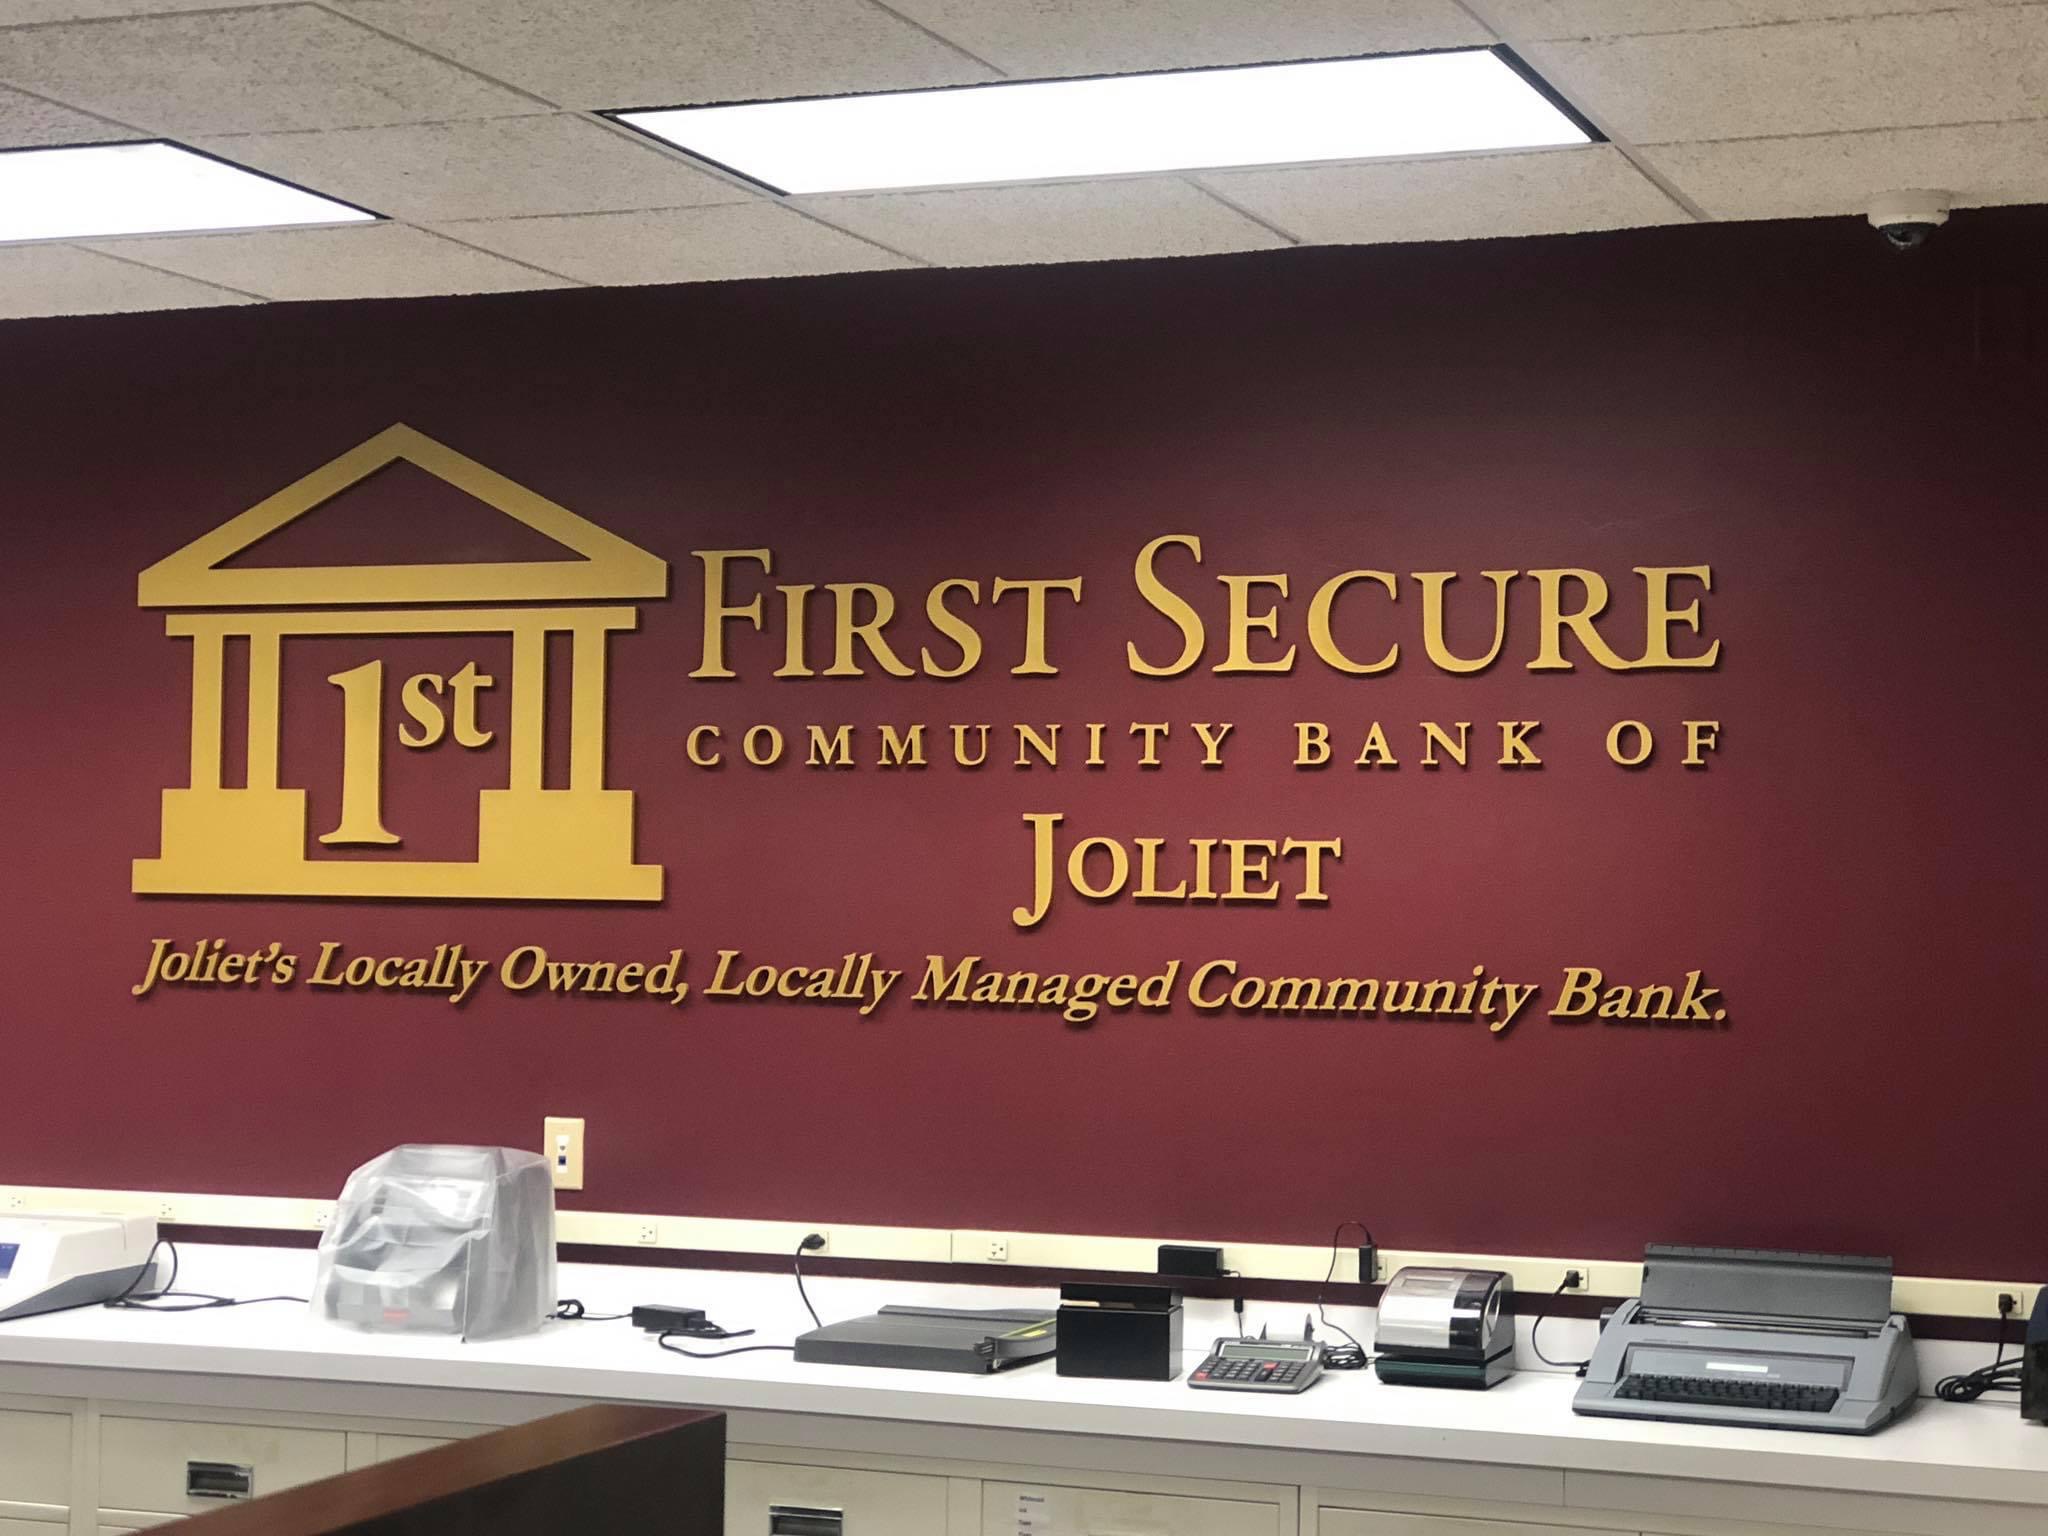 <h1 class="tribe-events-single-event-title">Join Scott at First Secure Community Bank in Joliet</h1>